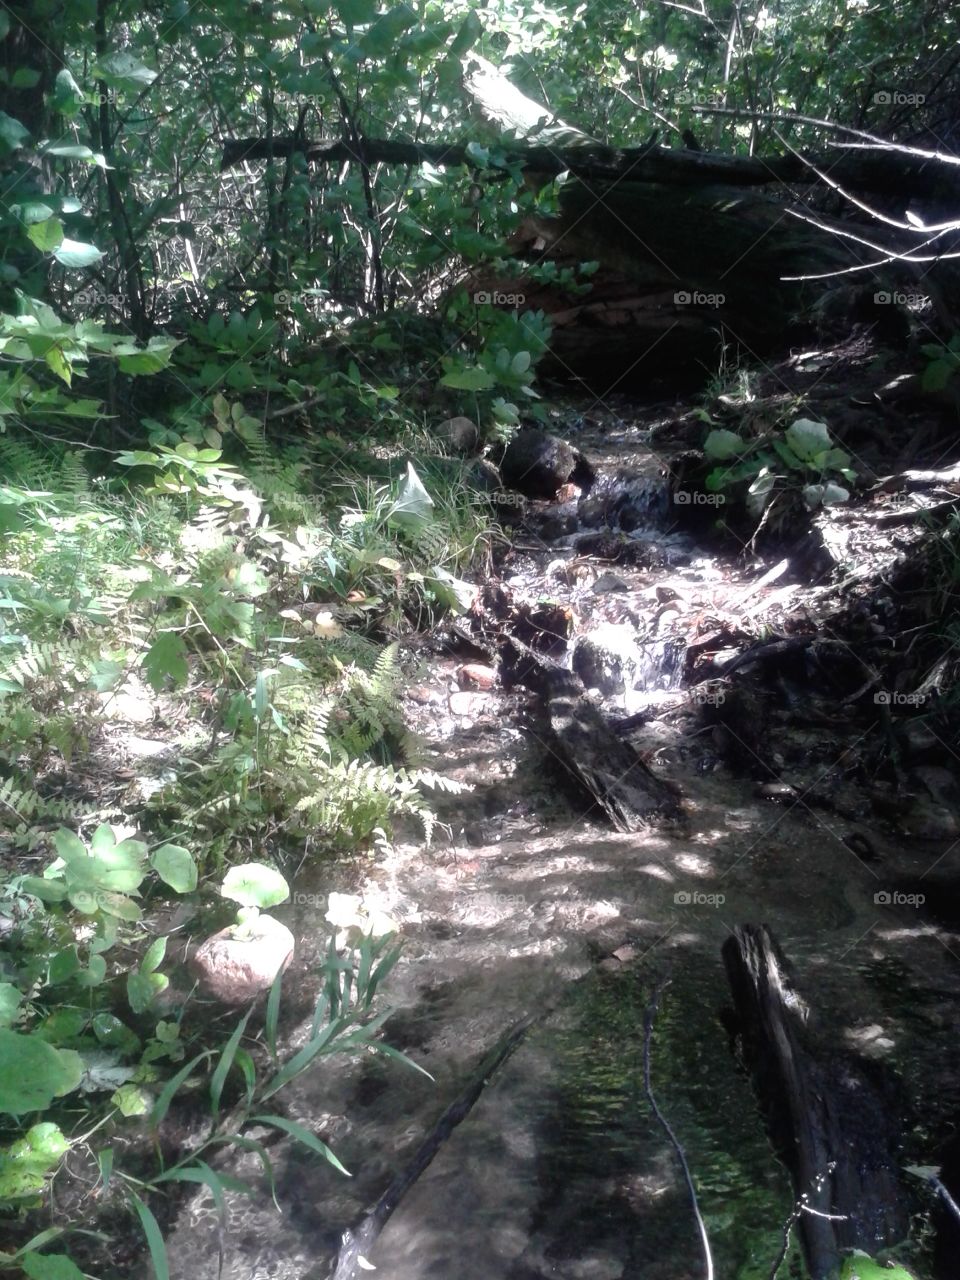 Hidden turtle. Found a turtle walking up this stream! Can you see him? 